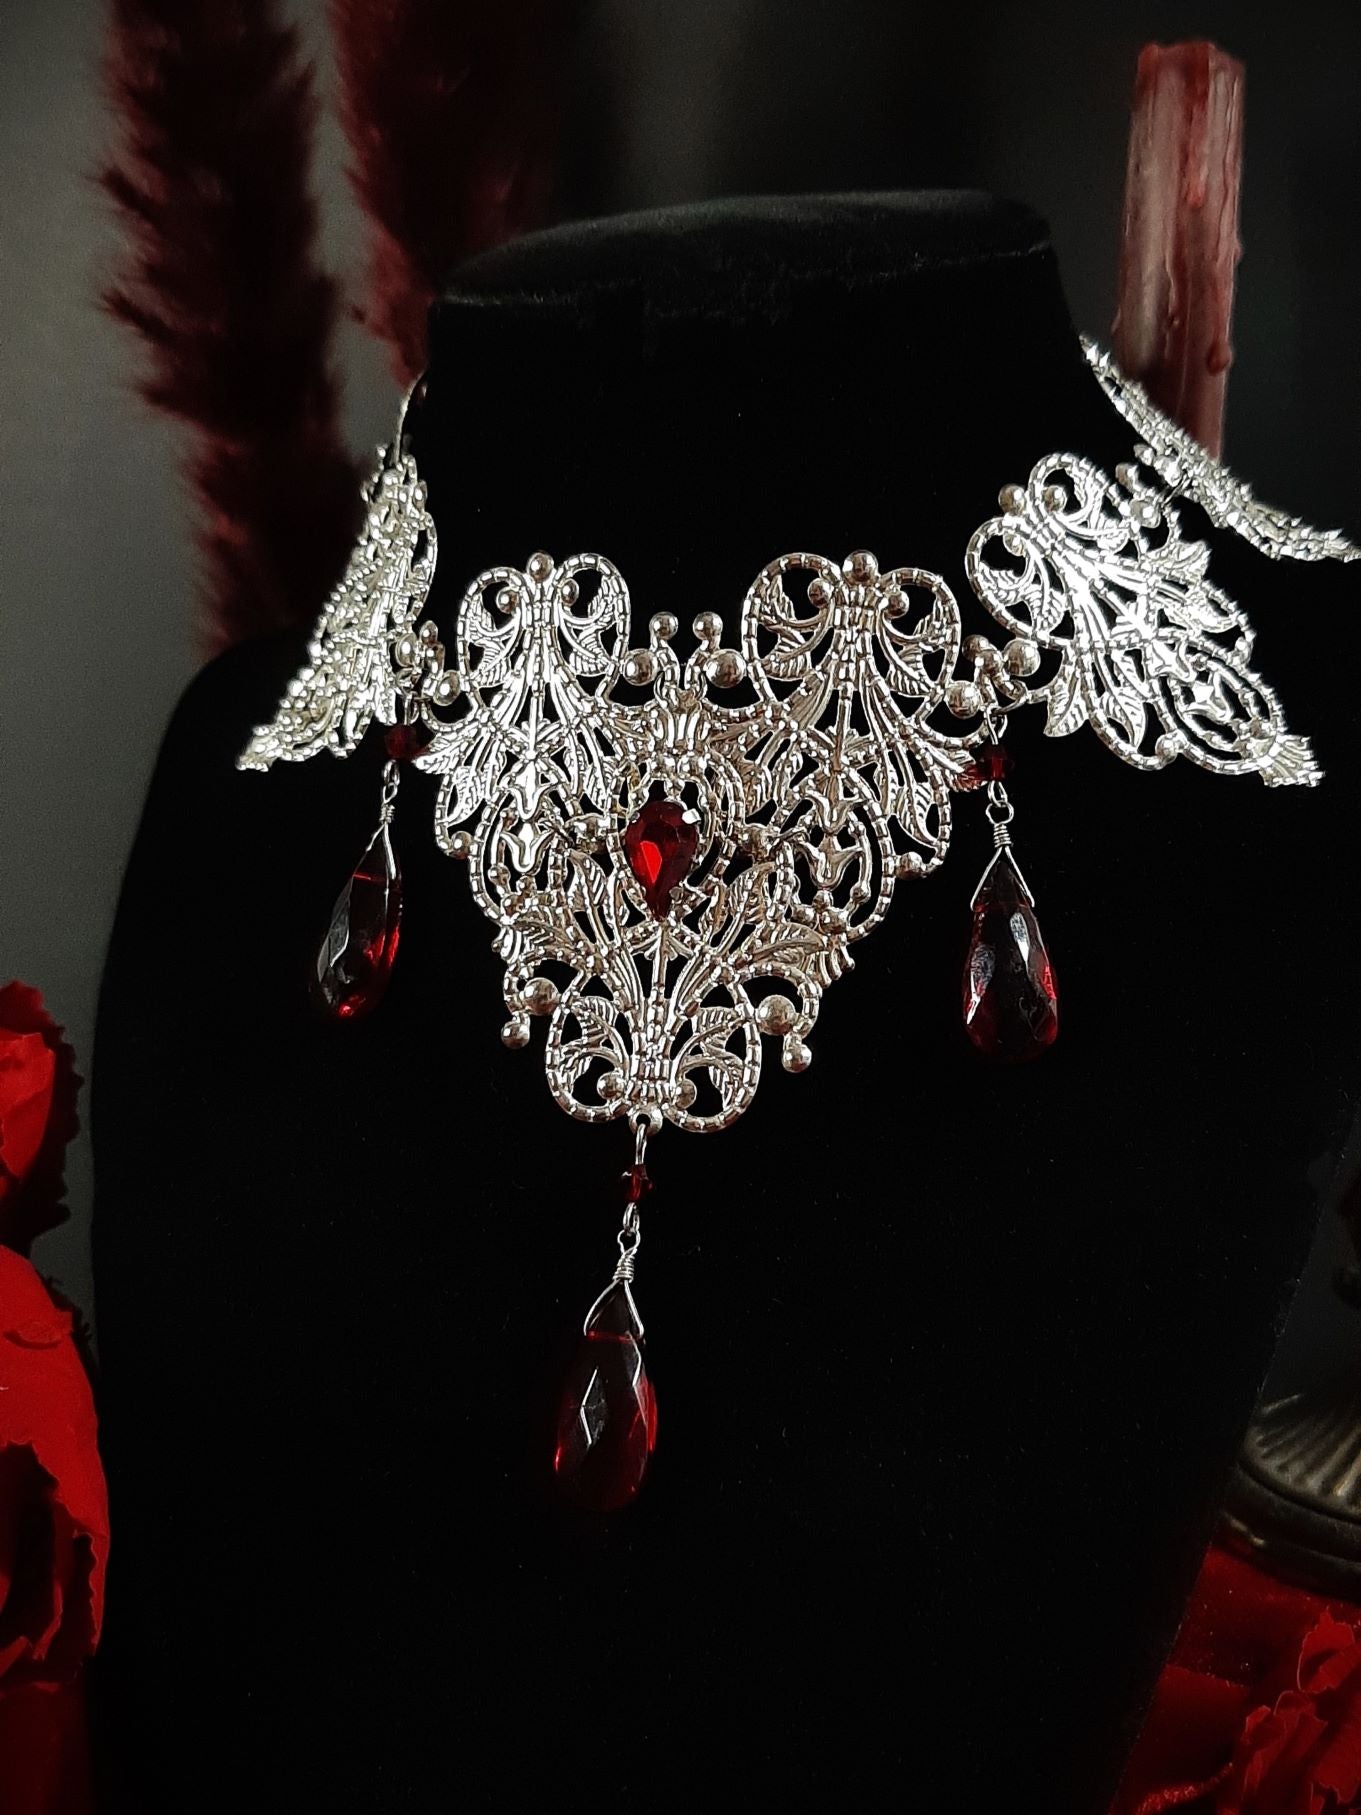 𝕺𝖕𝖚𝖑𝖊𝖓𝖈𝖊 𝟑 - Epic choker red- One left!